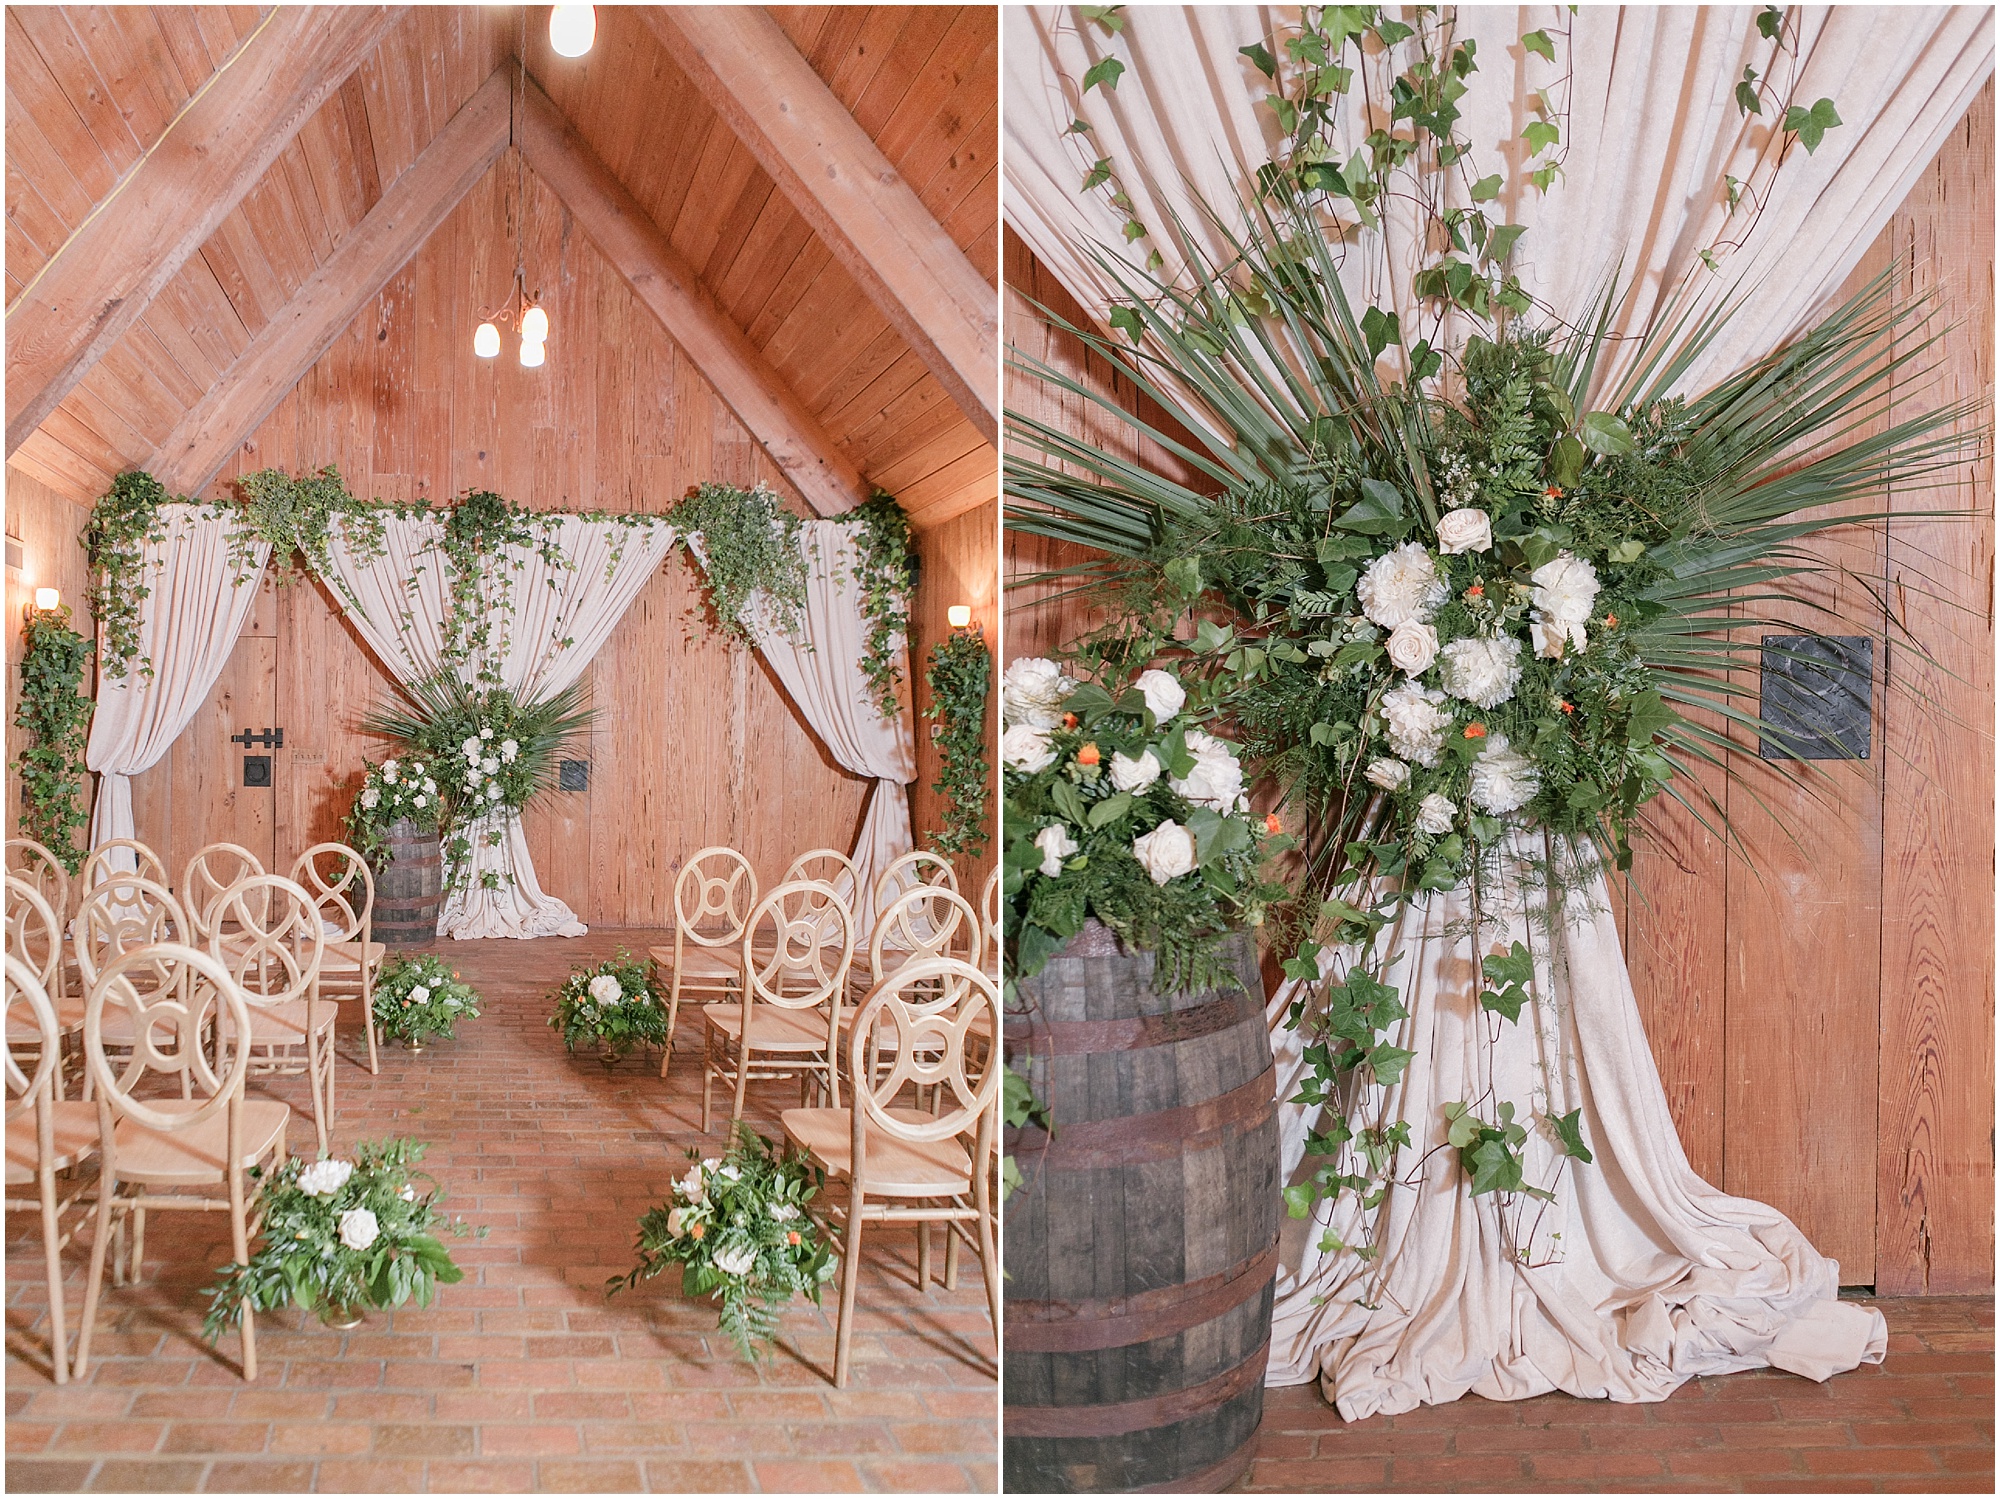 Green and white floral decor in the indoor ceremony space. 